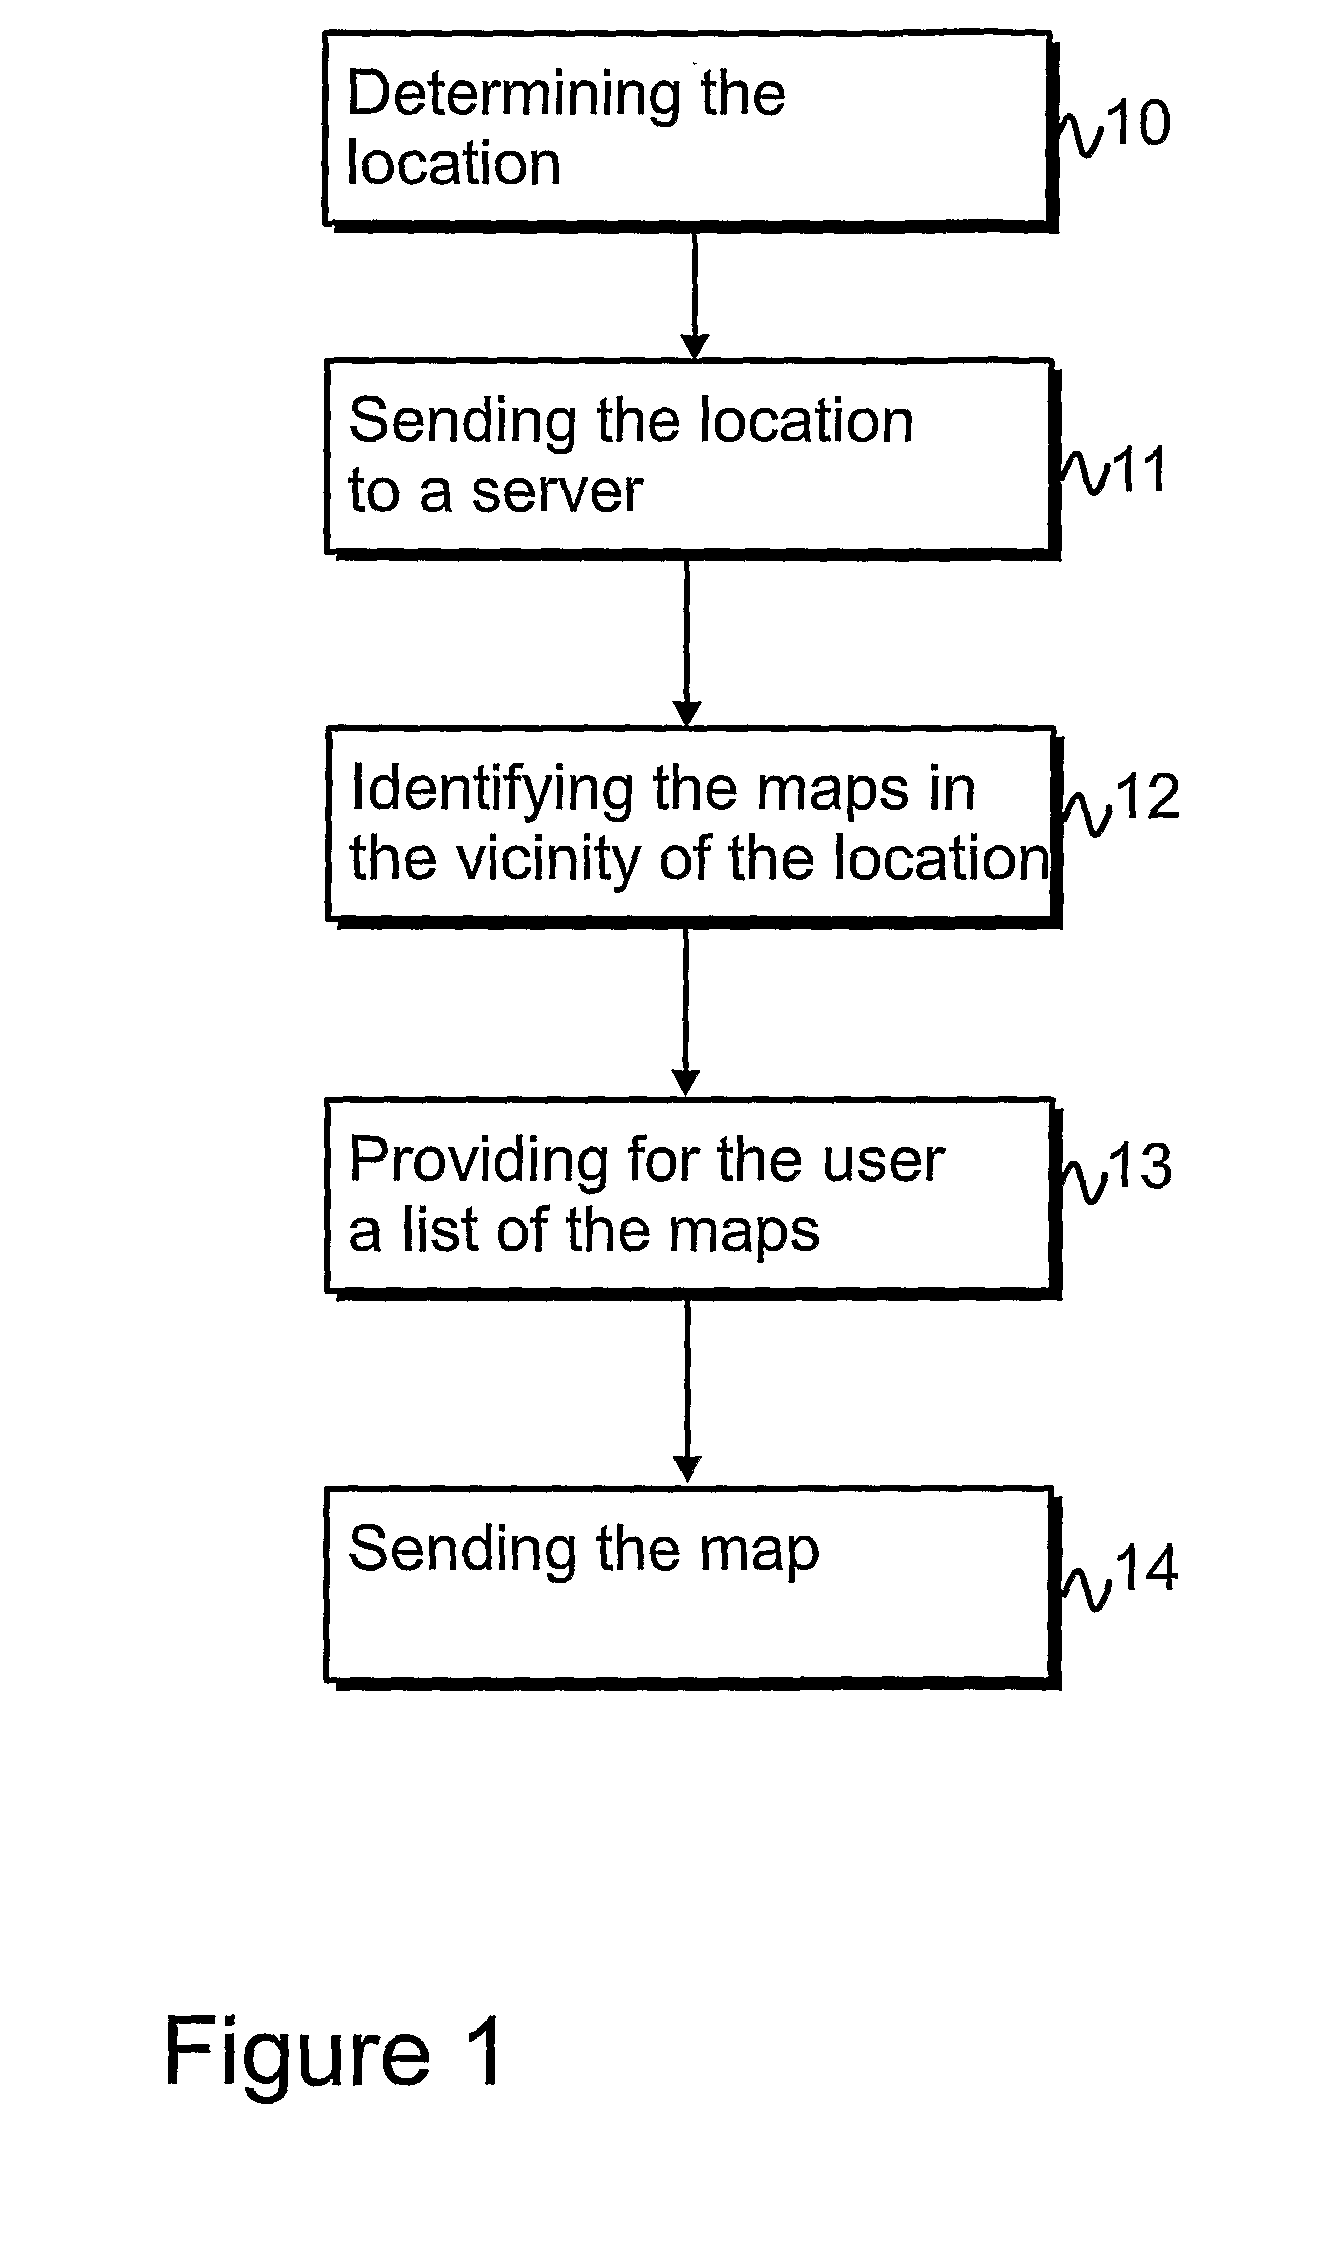 Distribution of map material